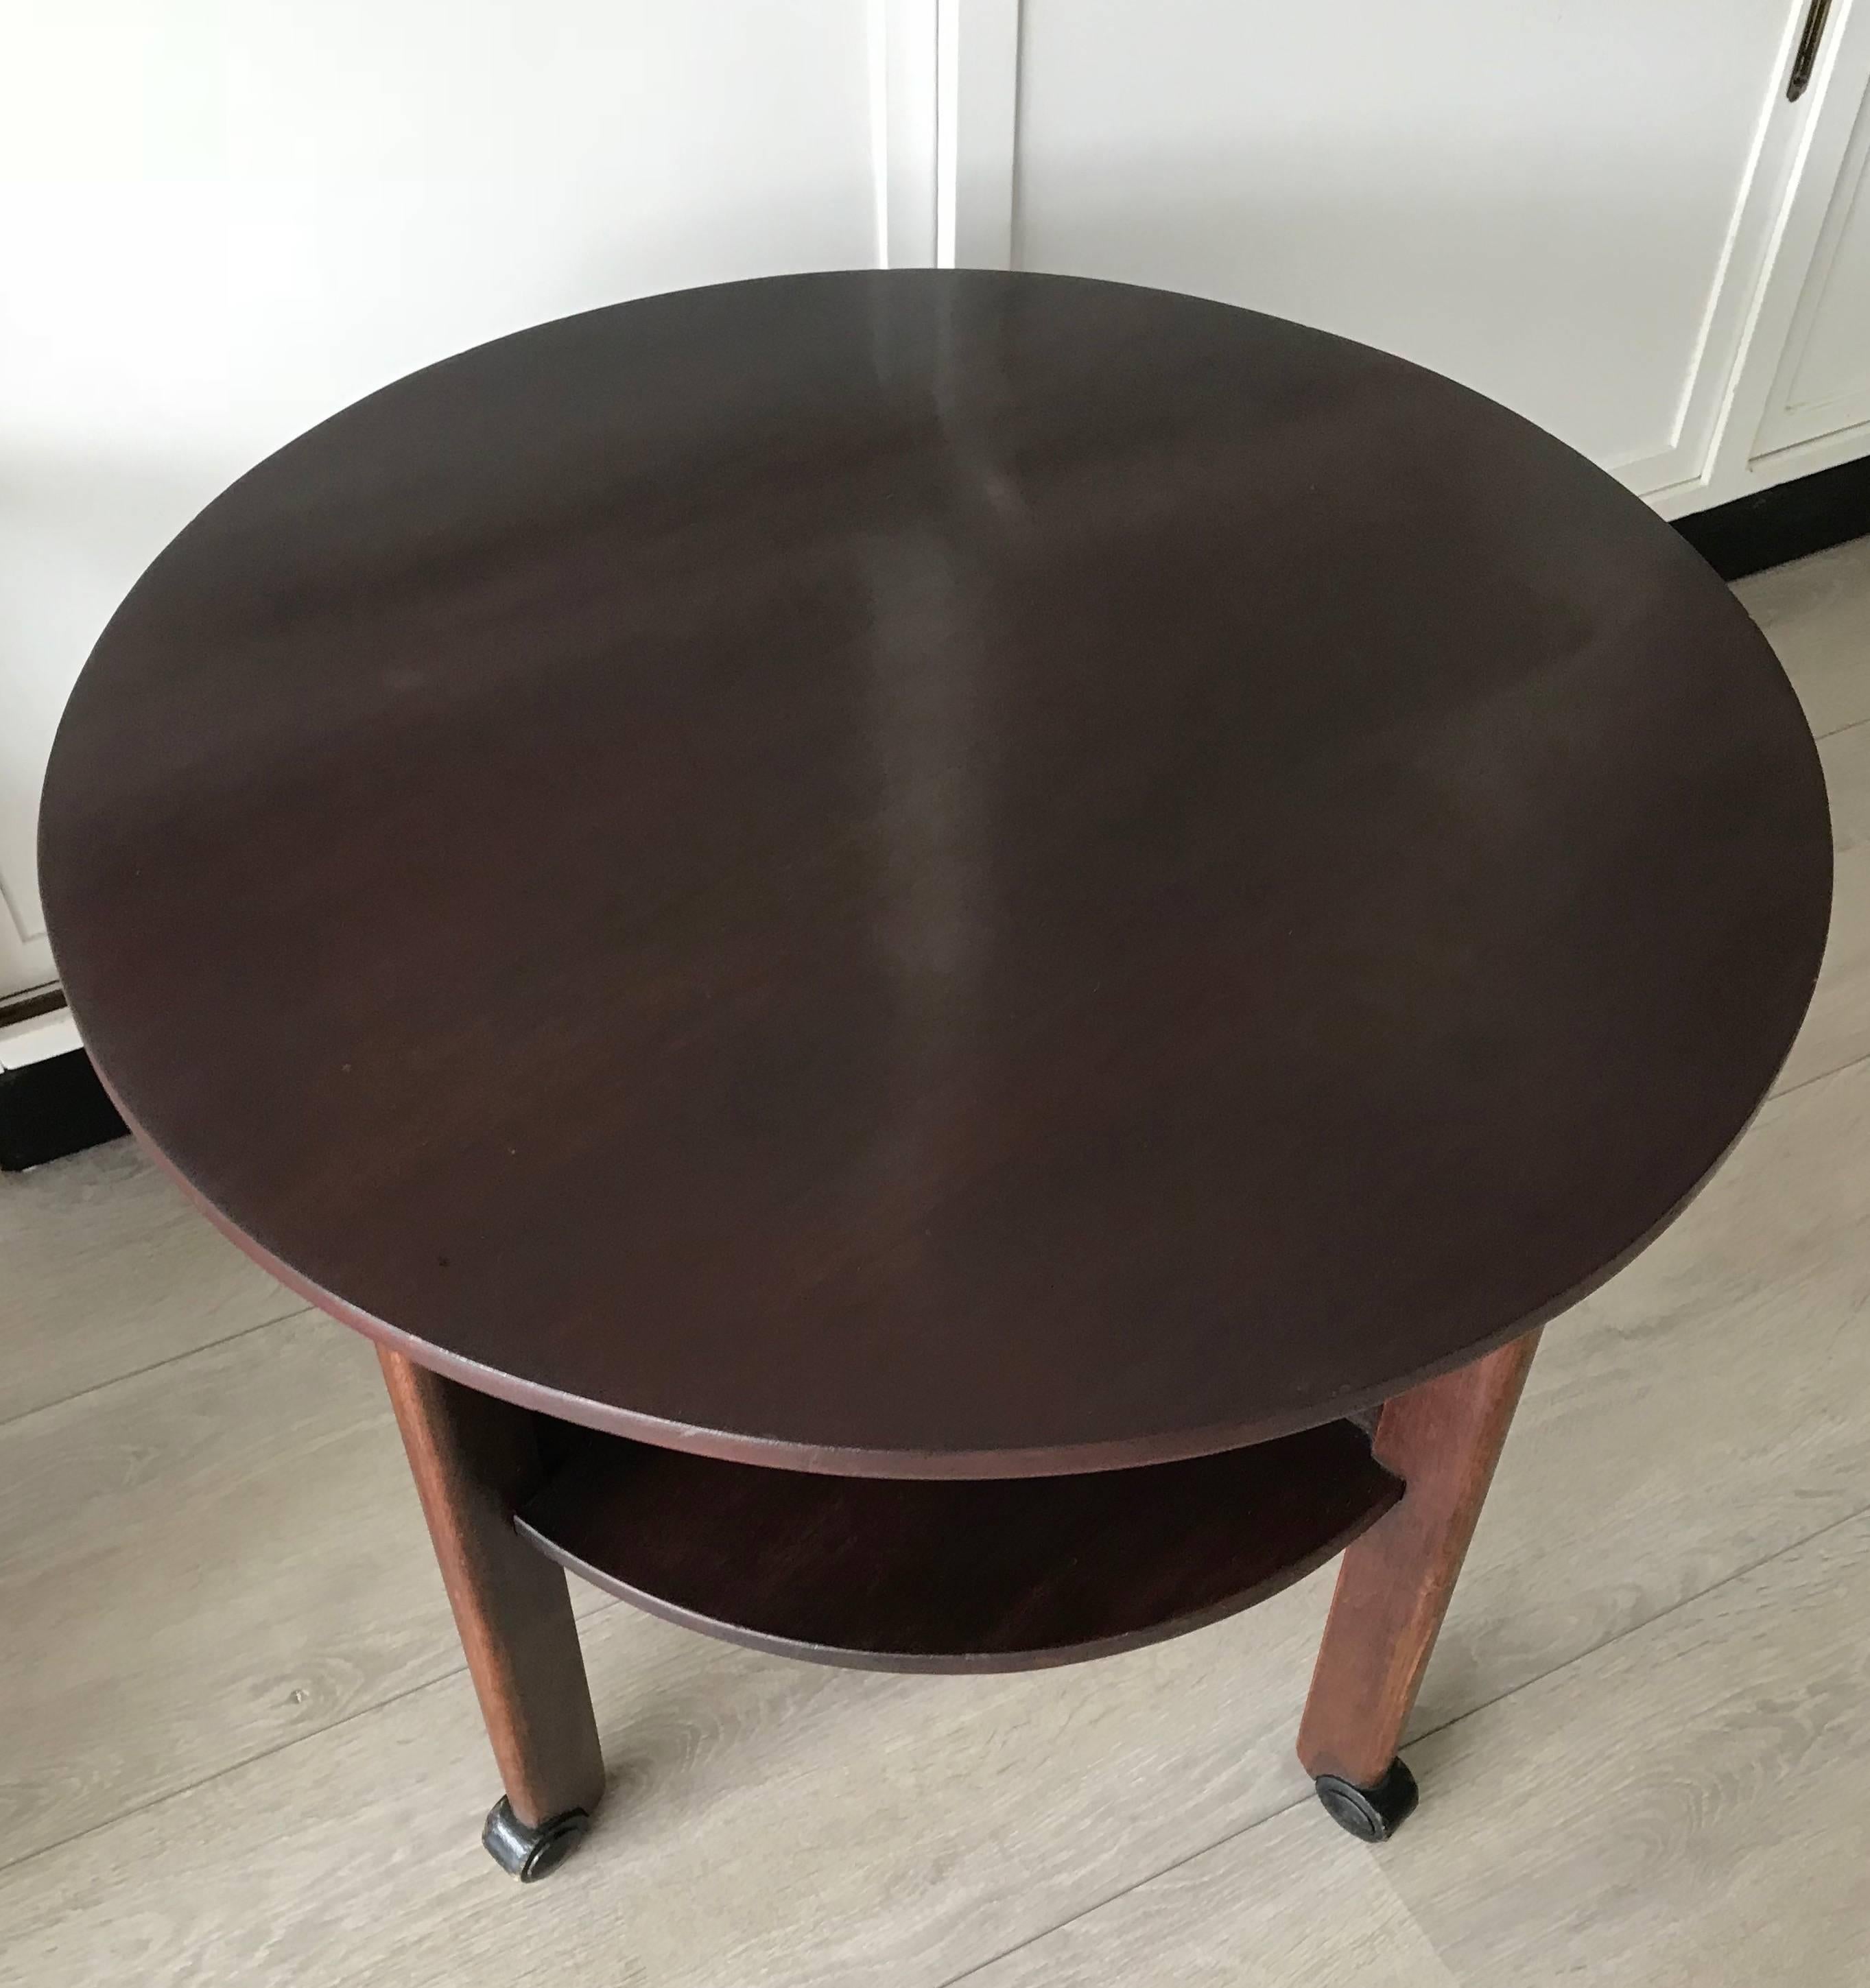 Wooden Art Deco Round Coffee or End Table with Four Shelfs for Books Etc For Sale 2